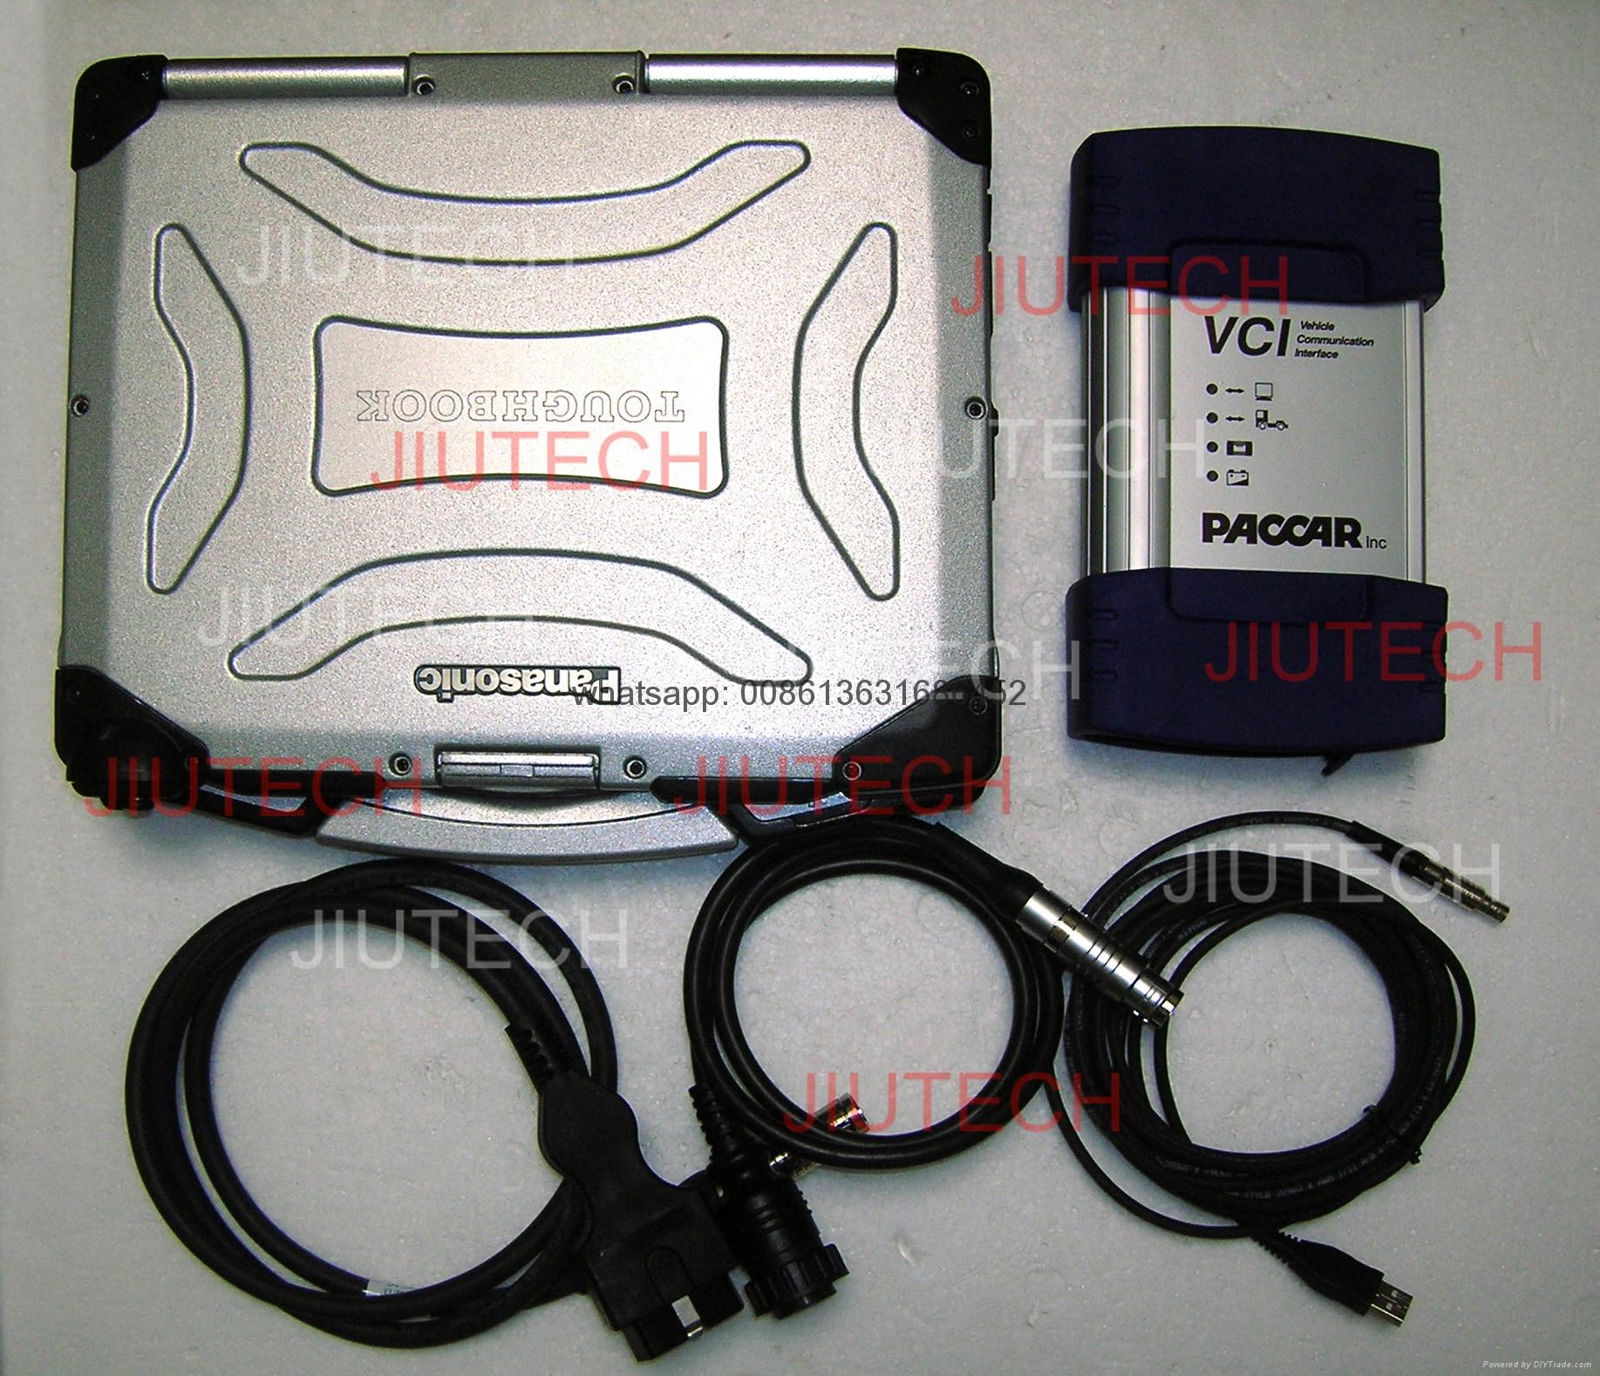 DAF VCI-560 MUX Heavy Duty Truck Diagnostic Scanner With Cf 30 Laptop 2